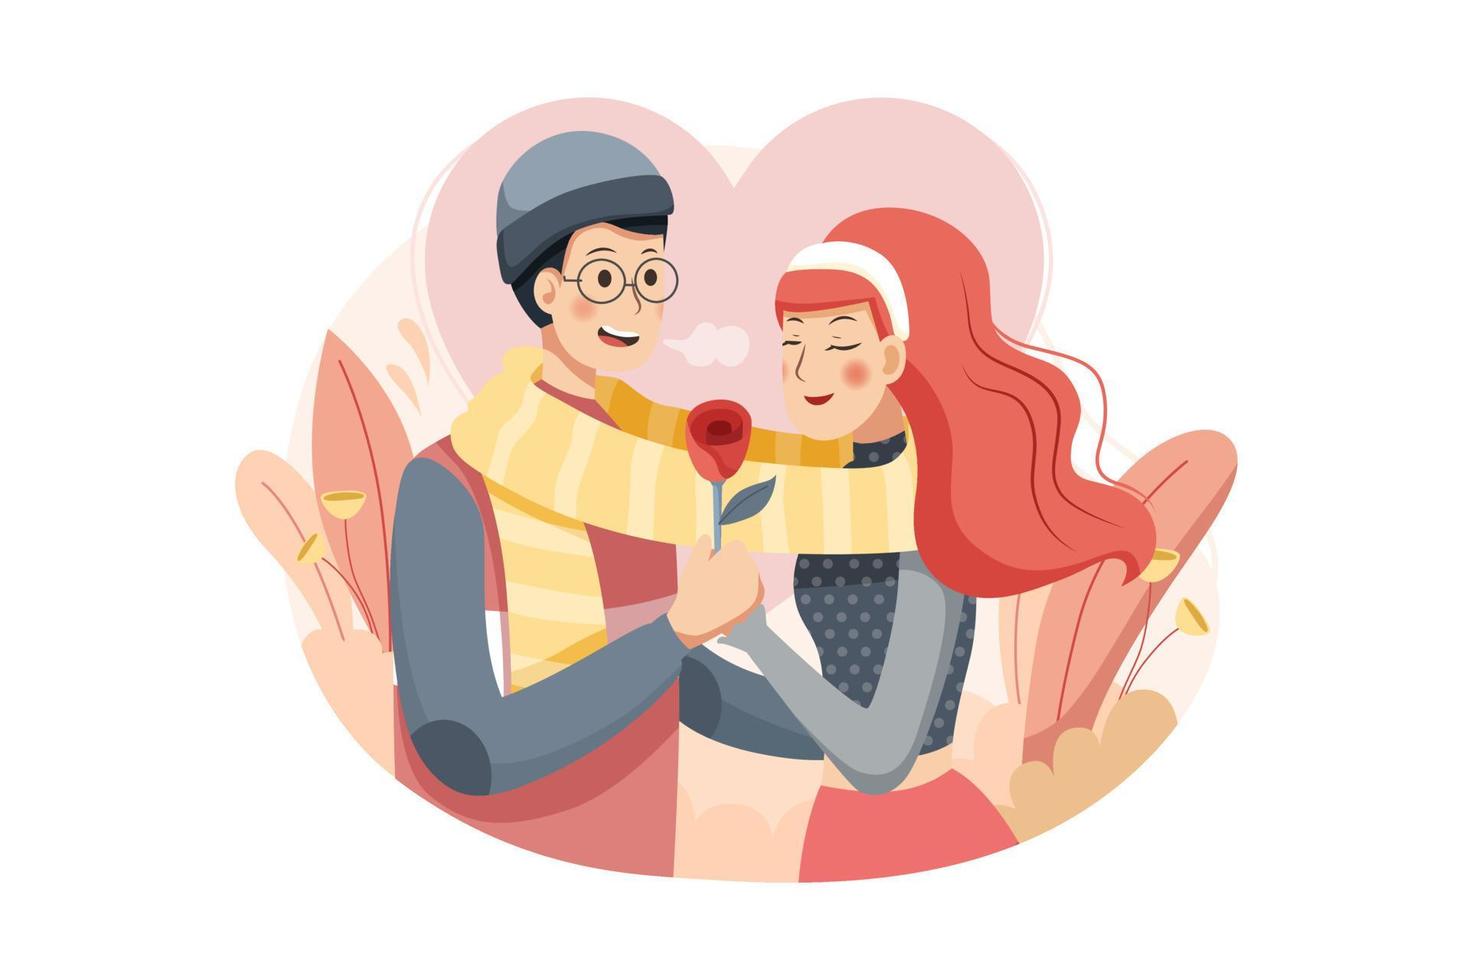 The man giving rose and telling love to his girlfriend on valentine day illustration vector